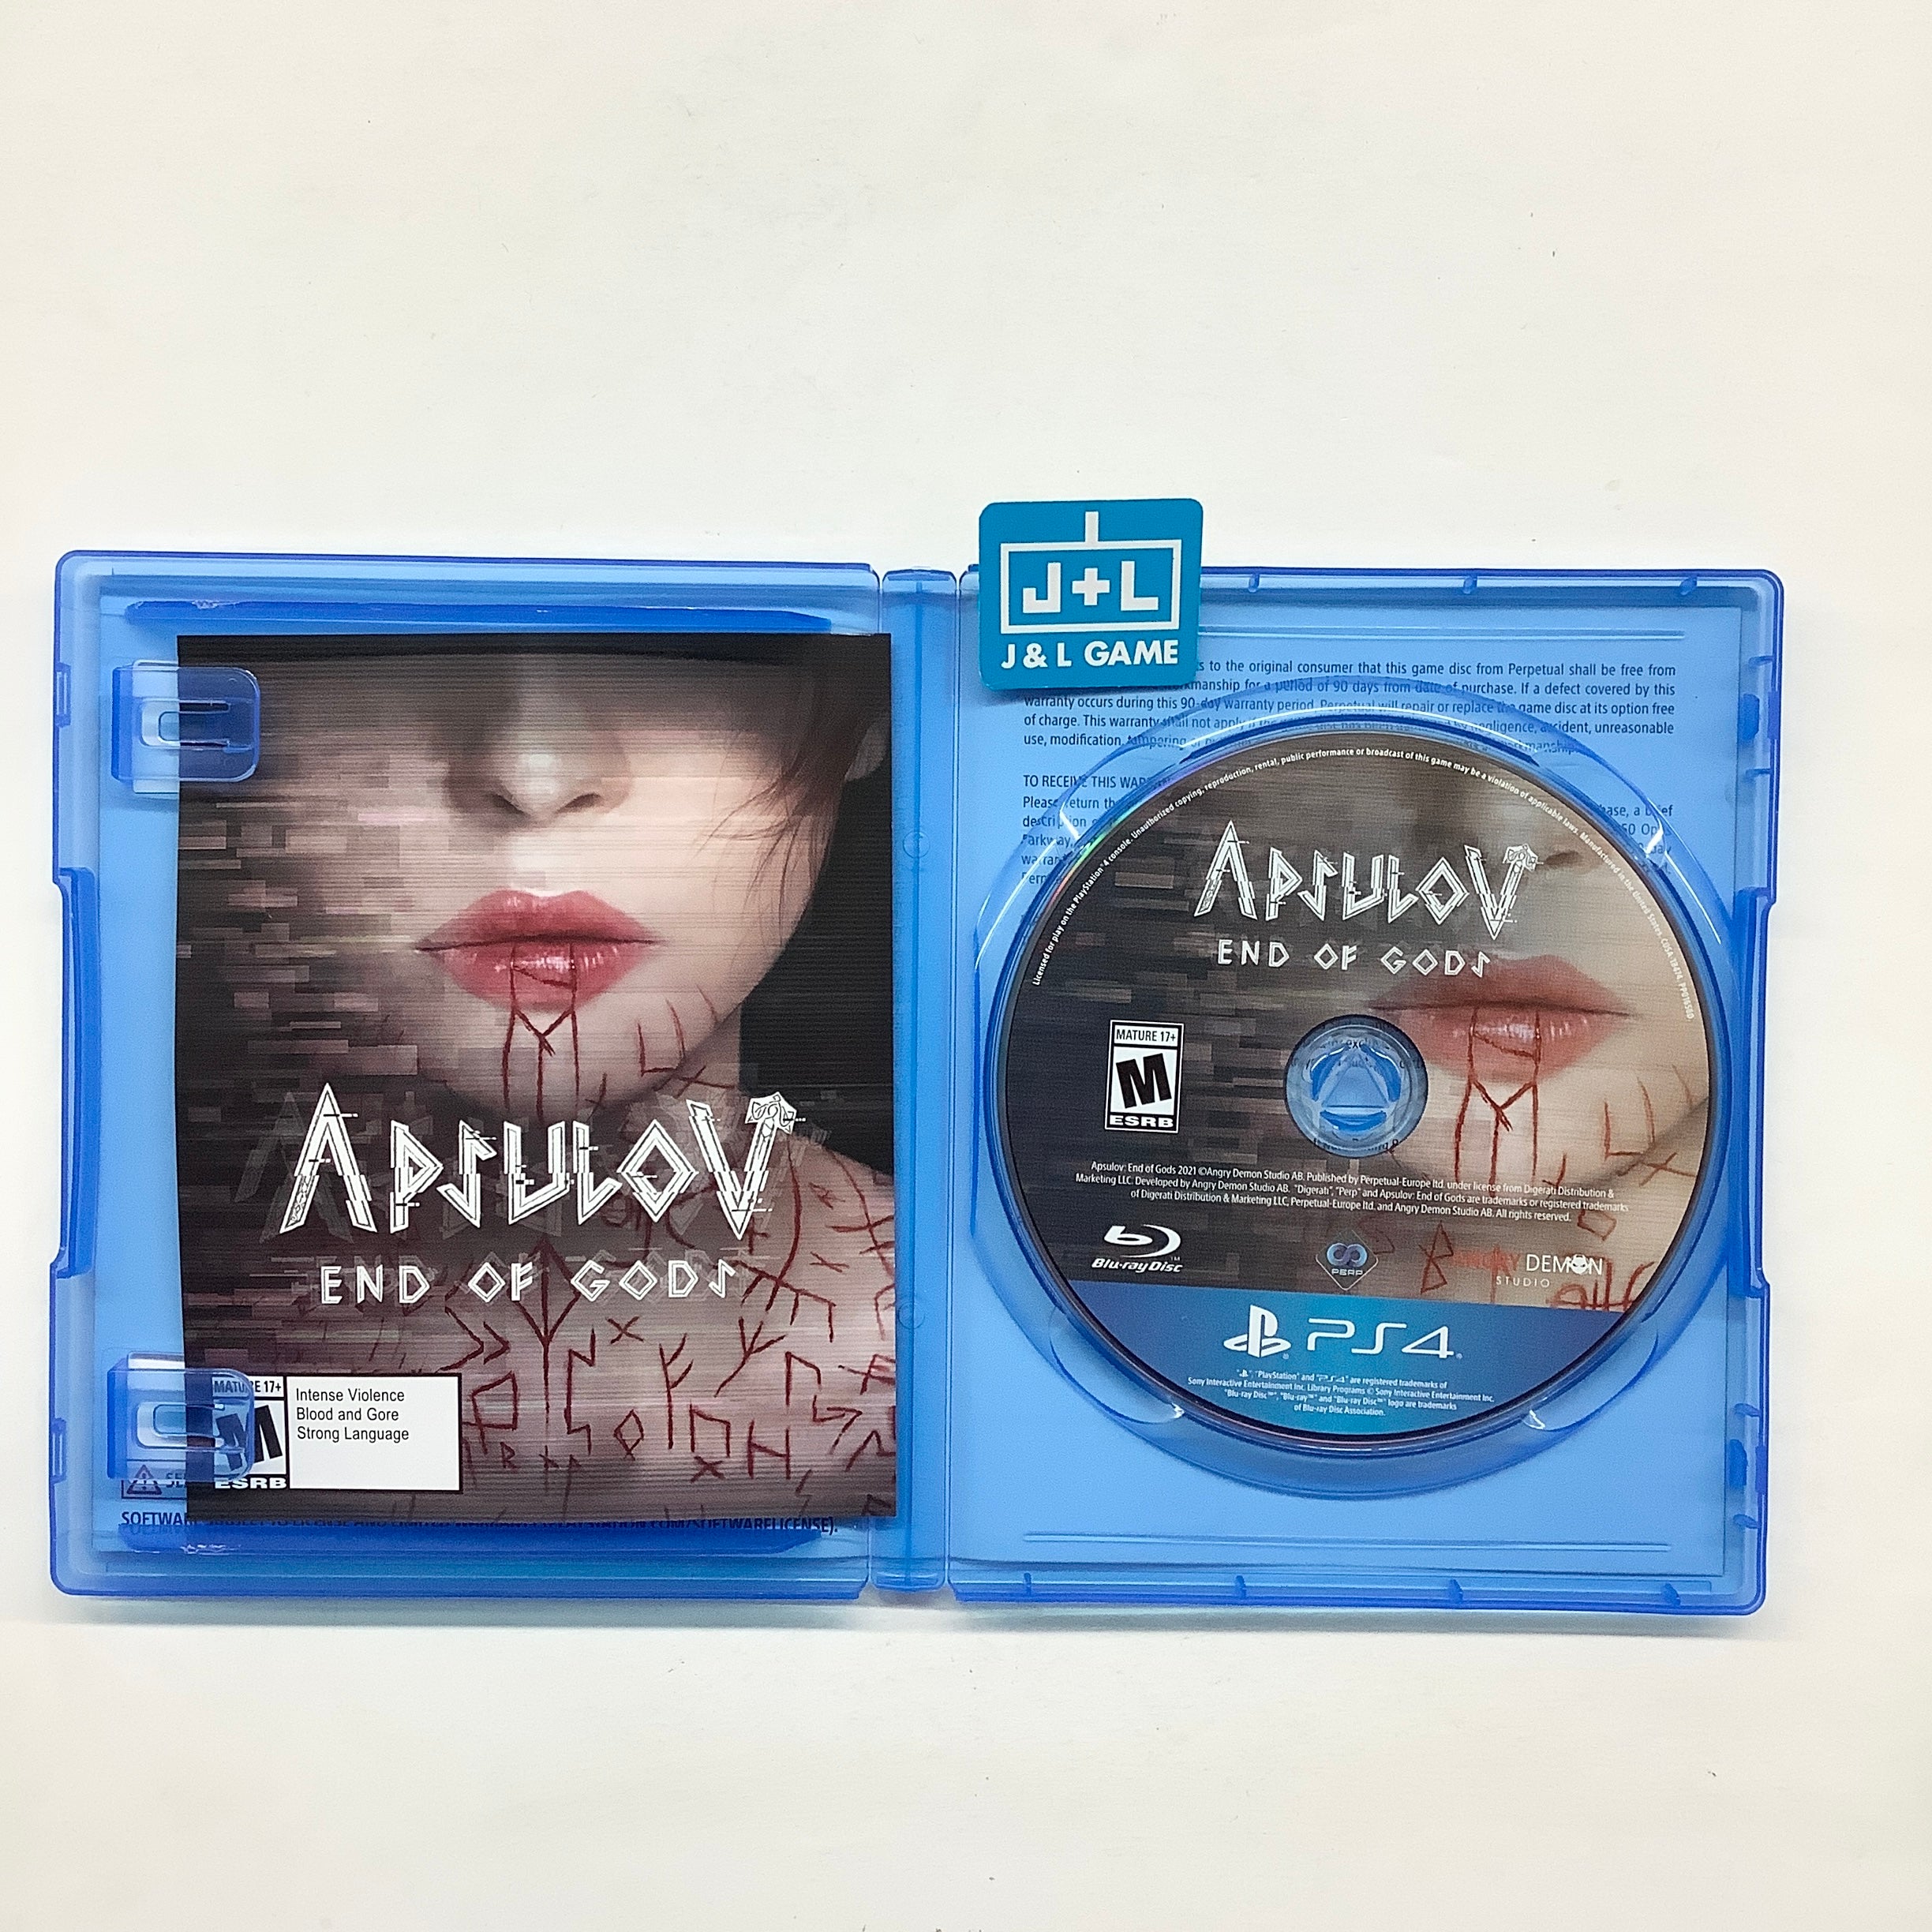 Apsulov: End of Gods - (PS4) PlayStation 4 [UNBOXING] Video Games Perpetual   